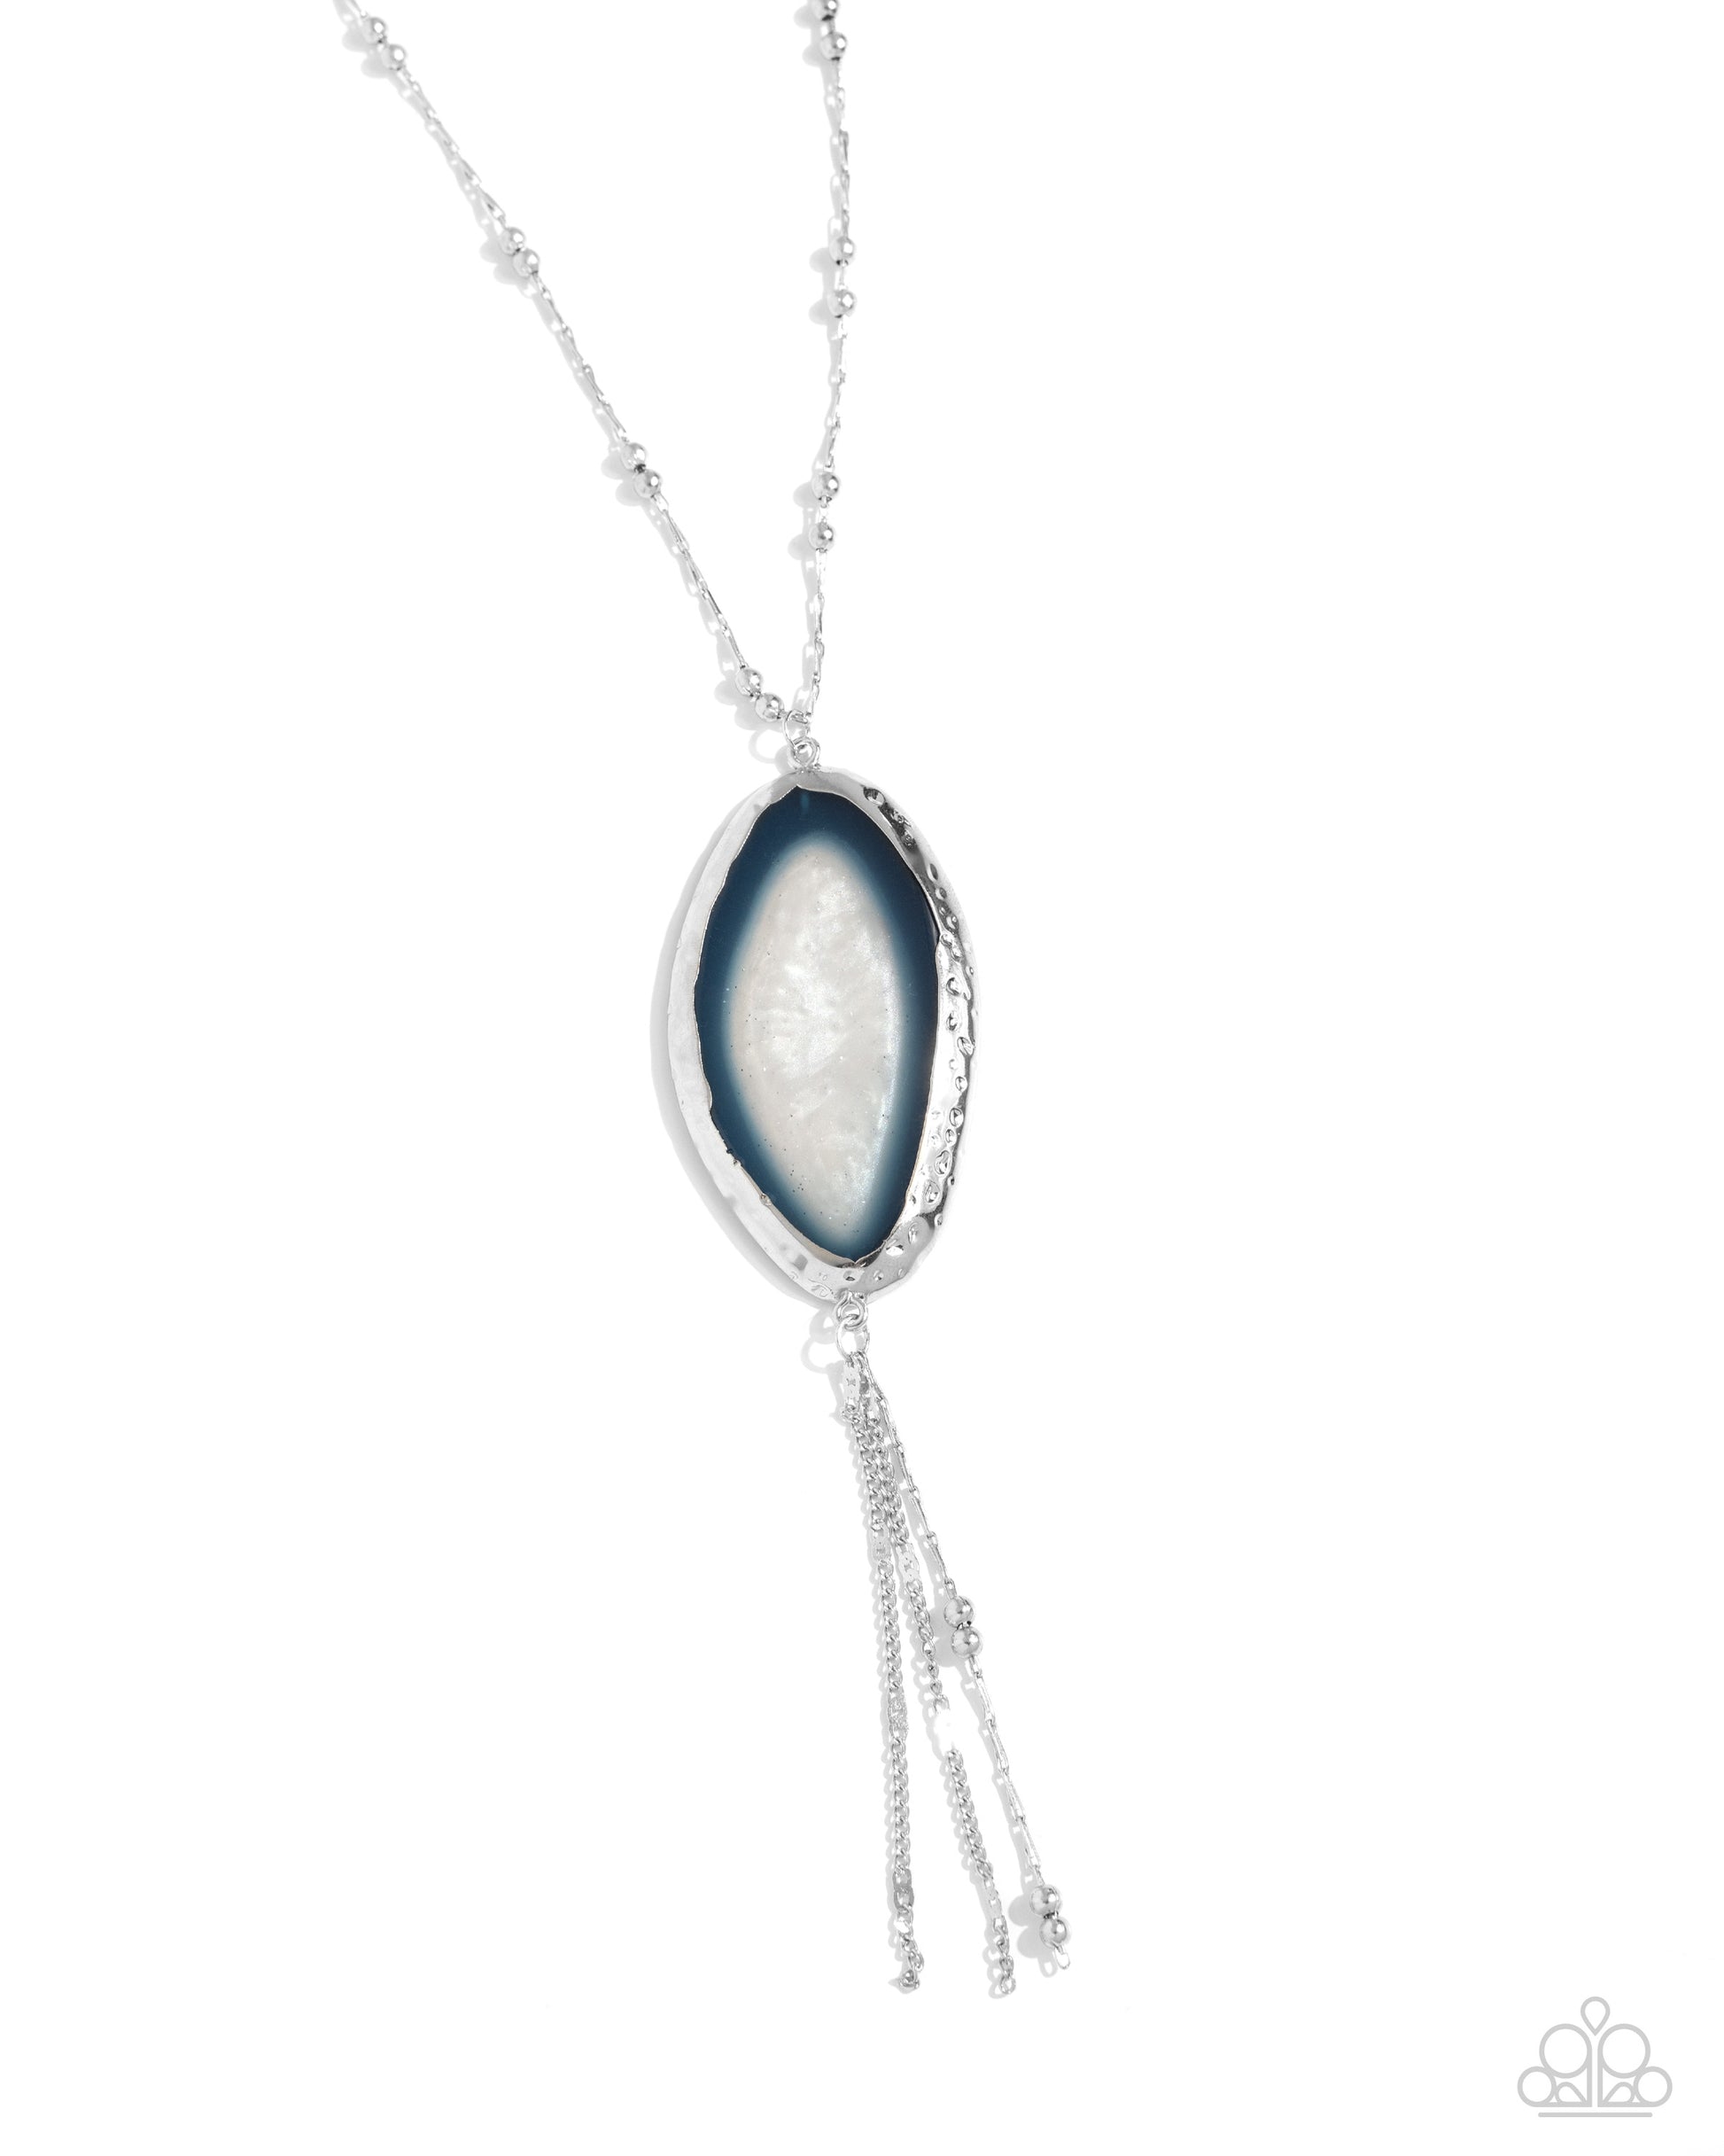 <p>Pressed in an abstract, hammered oval frame, a transparent blue geode-like stone glistens below the collar from an abstract silver satellite chain for a blissfully balanced look. Strands of dainty silver classic and satellite chains cascade from the geode pendant for additional detail and eye-catching movement. Features an adjustable clasp closure.</p> <p><i> Sold as one individual necklace. Includes one pair of matching earrings.</i></p>